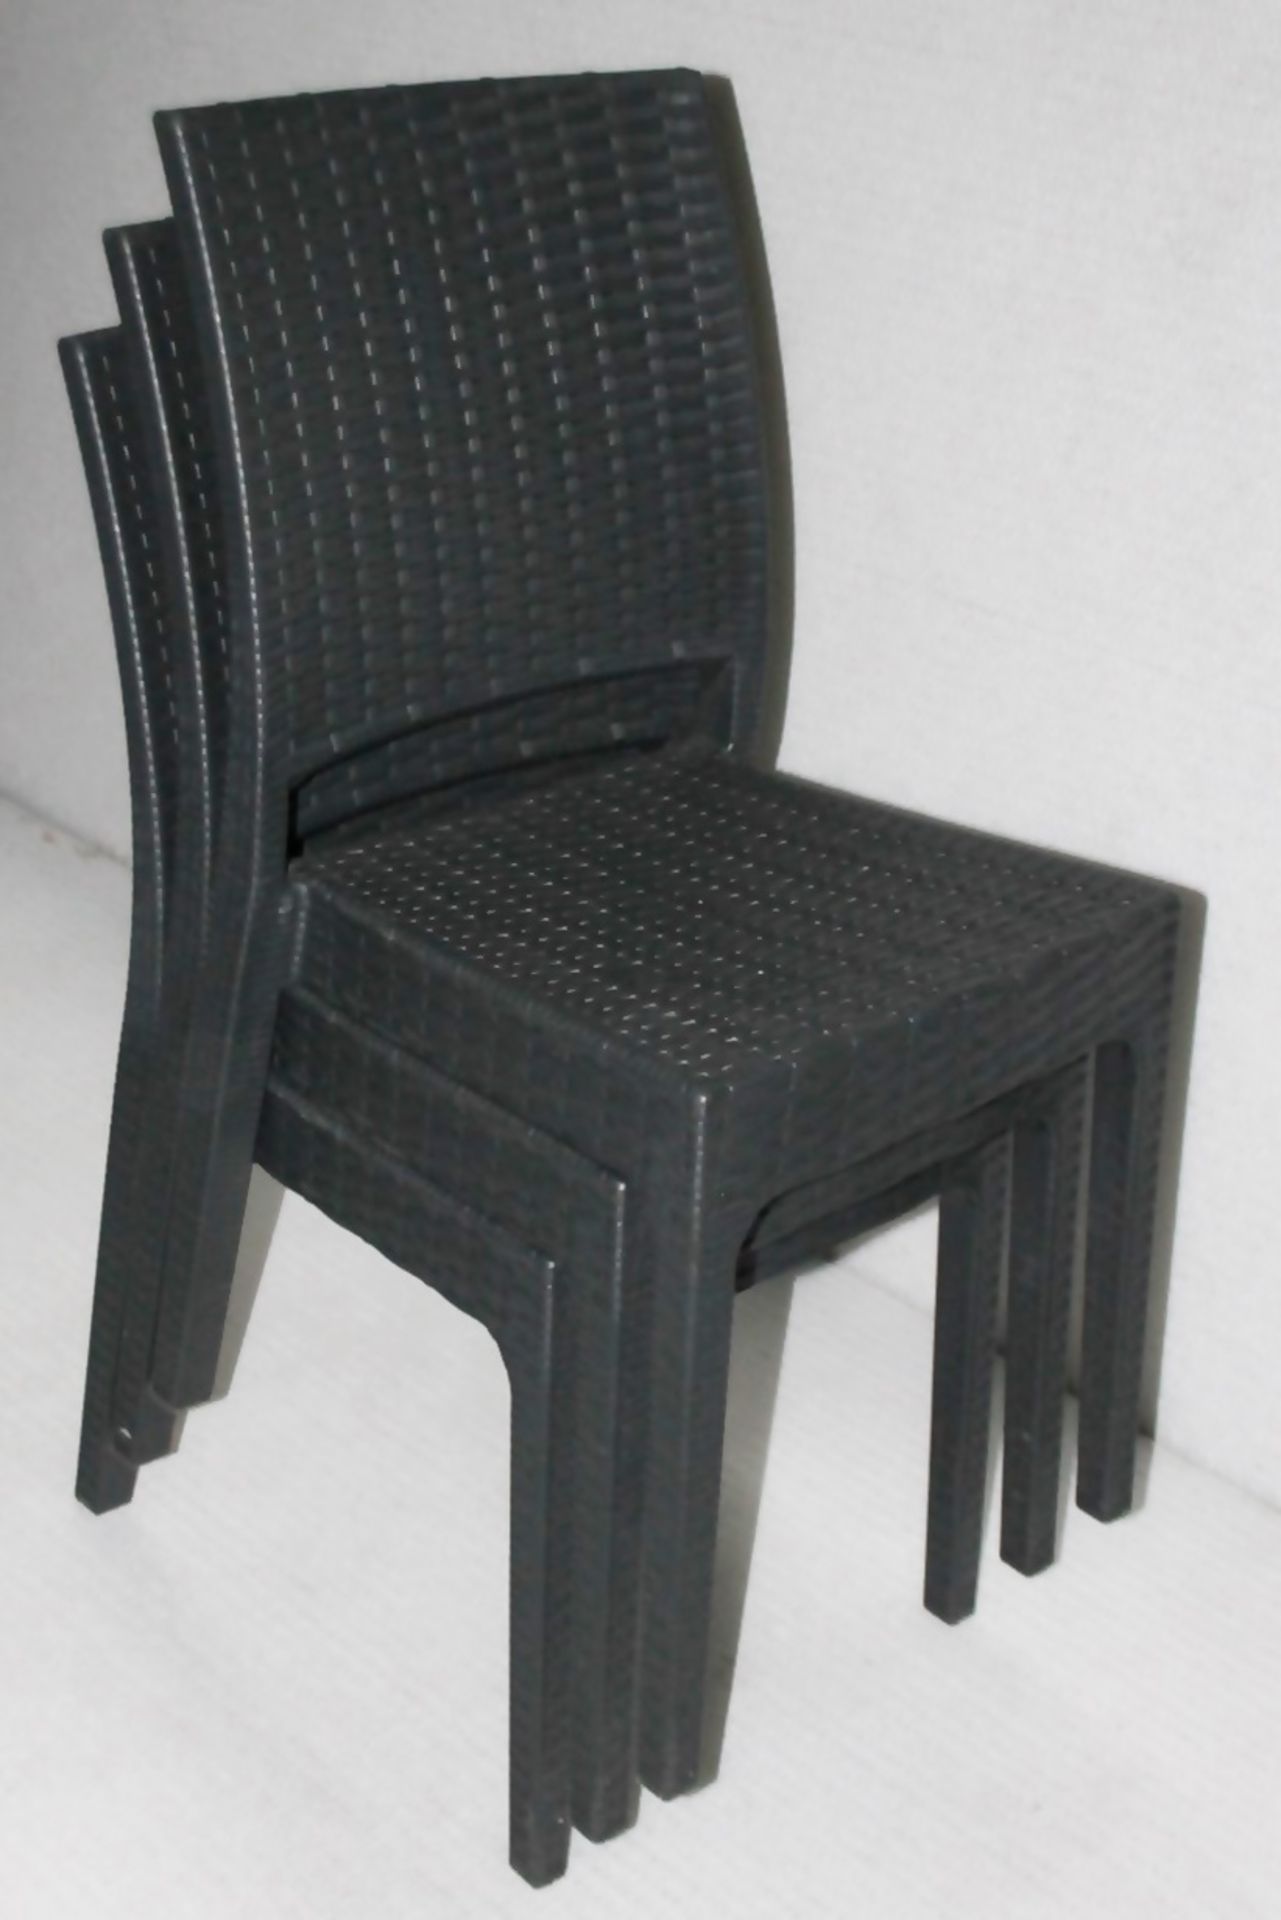 8 x SIESTA EXCLUSIVE 'Florida' Commercial Stackable Rattan-style Chairs In Dark Grey - CL987 - - Image 10 of 13